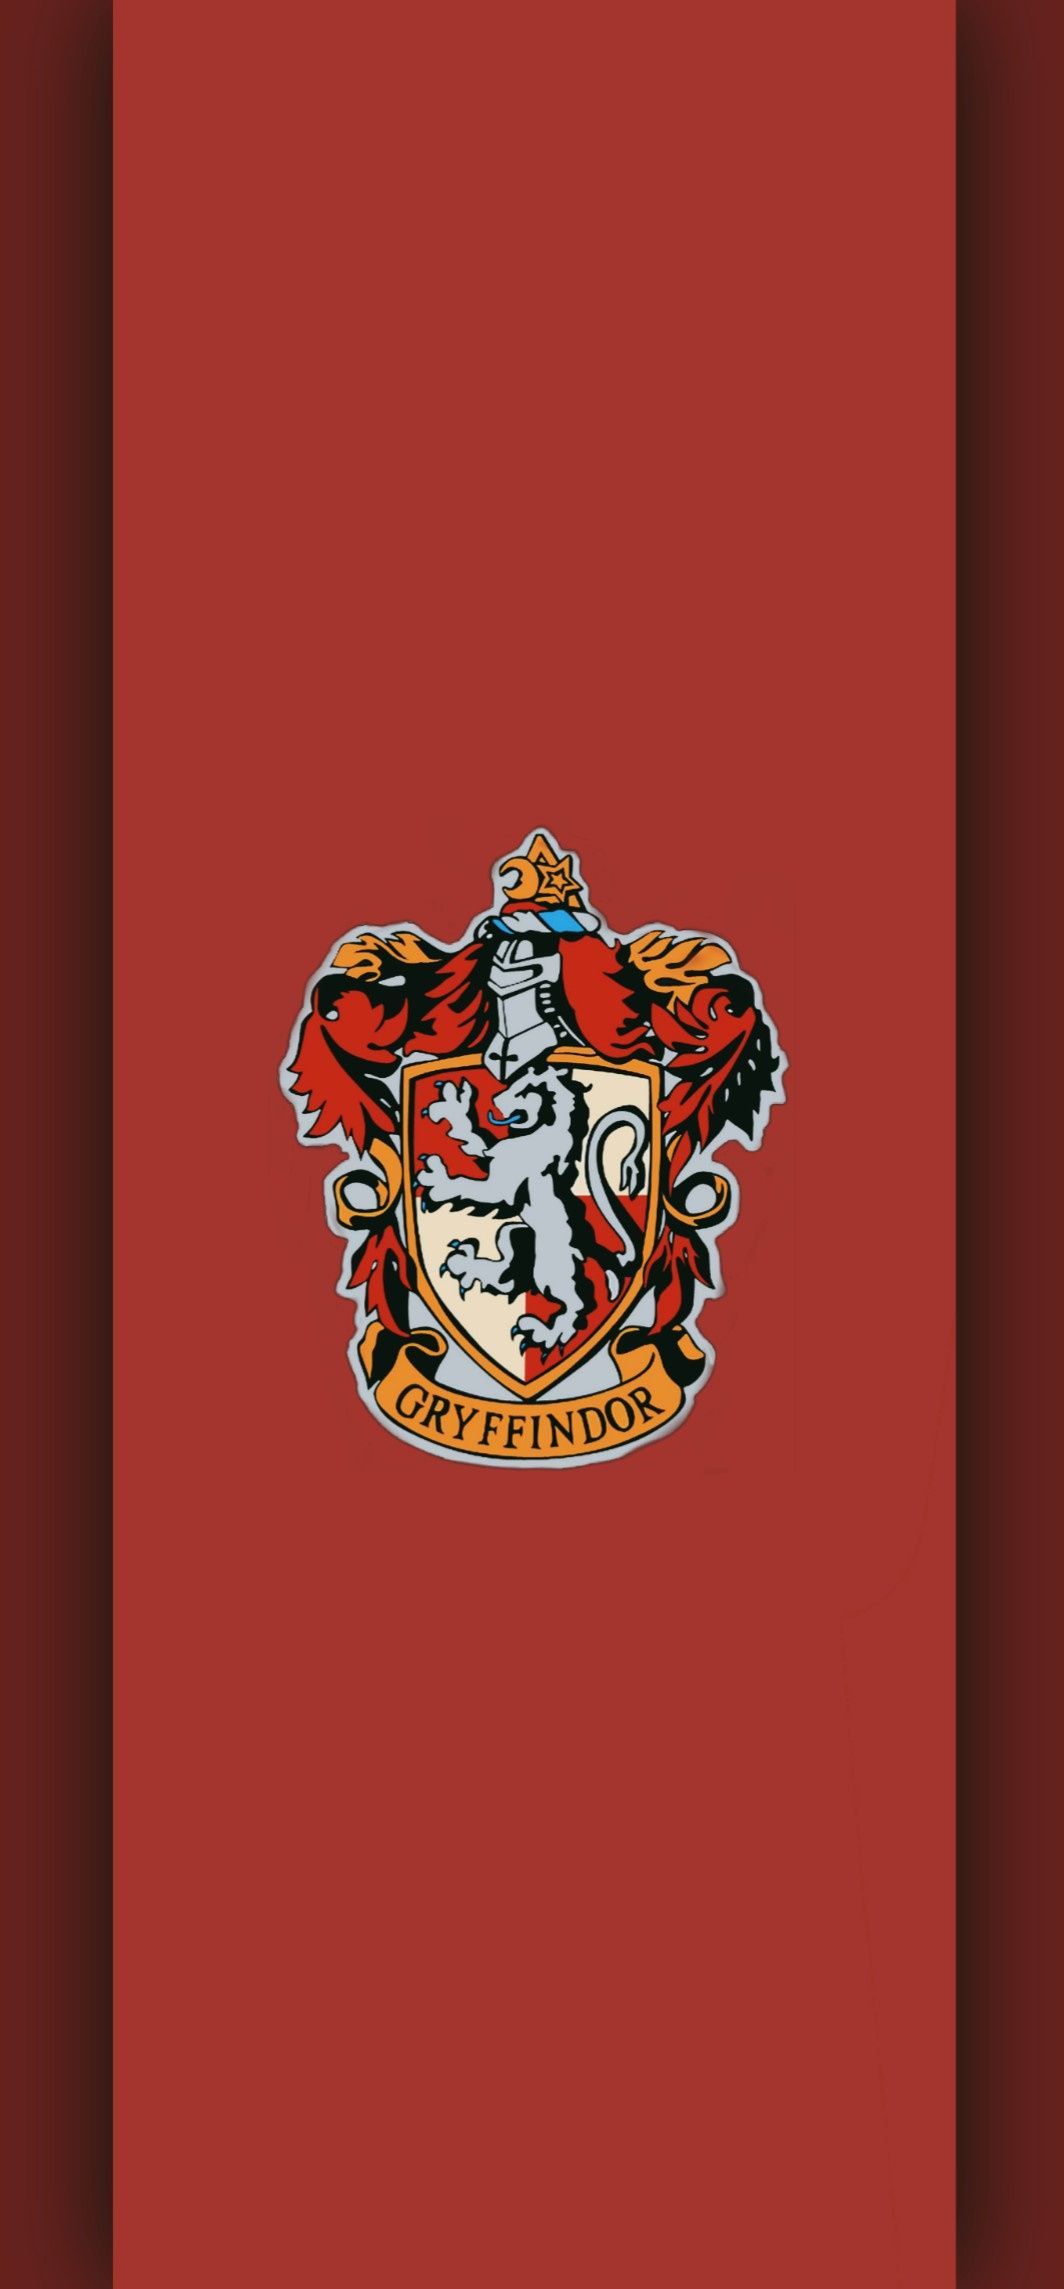 Free Gryffindor Wallpaper Options For Your Phone. Harry potter wallpaper phone, Gryffindor, Gryffindor aesthetic